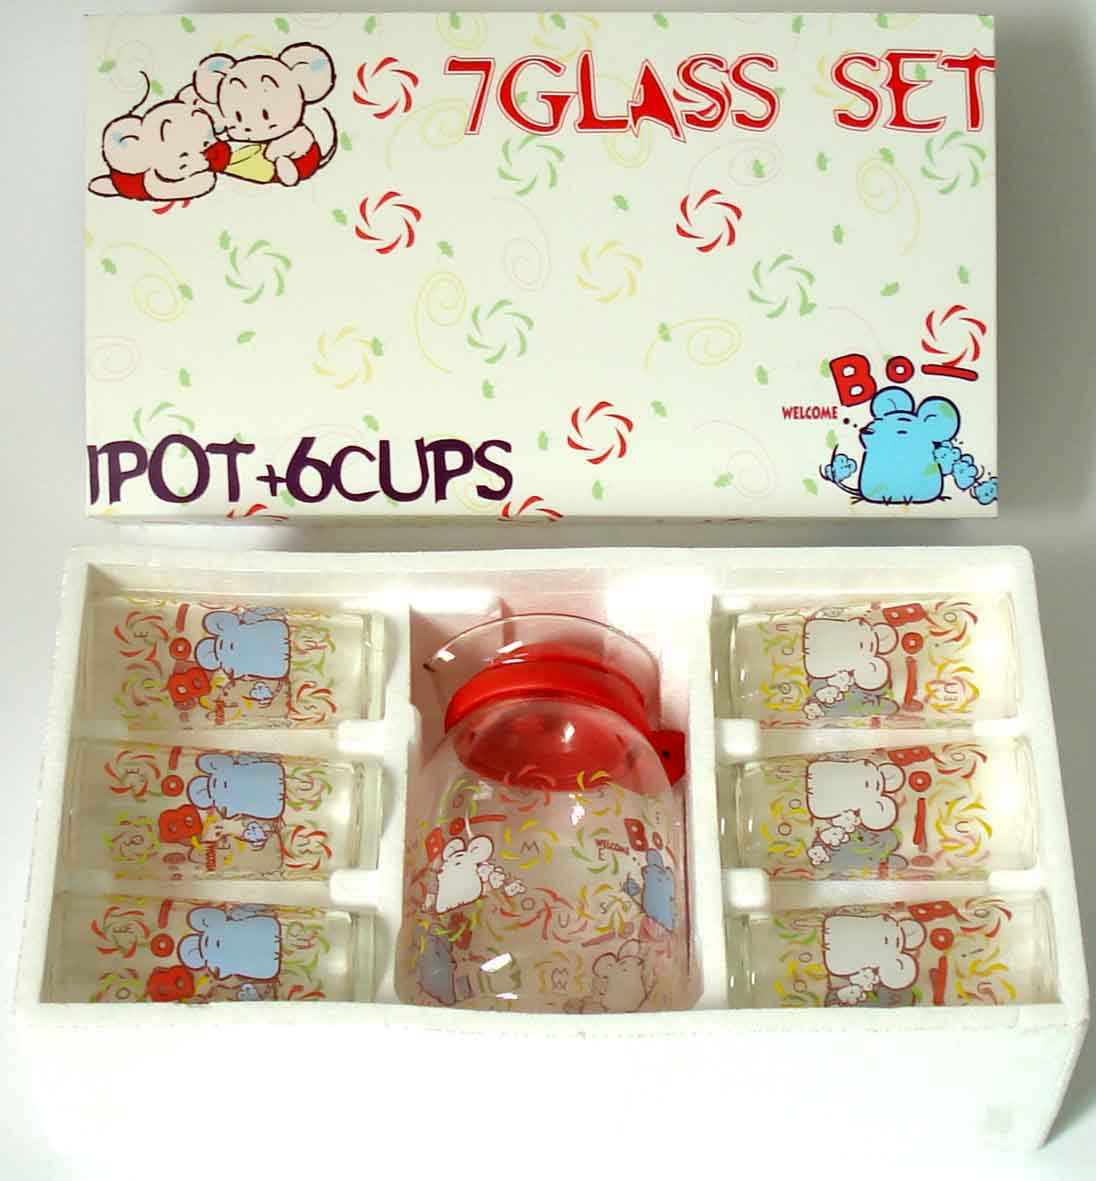 6 cups and a water jar in a gift box